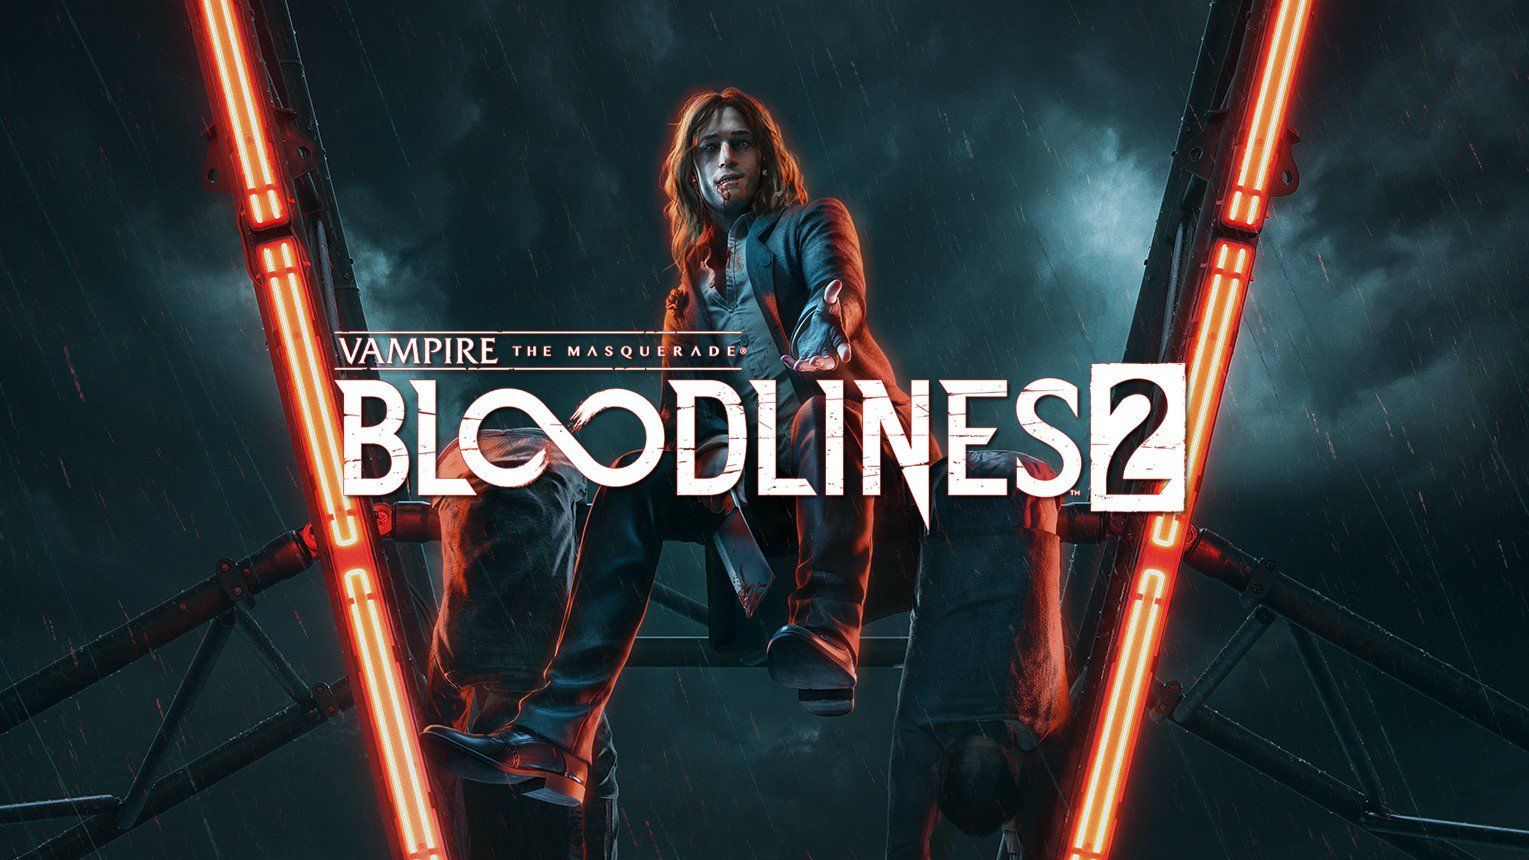 Vampire the Masquerade: Bloodlines 2 is happening